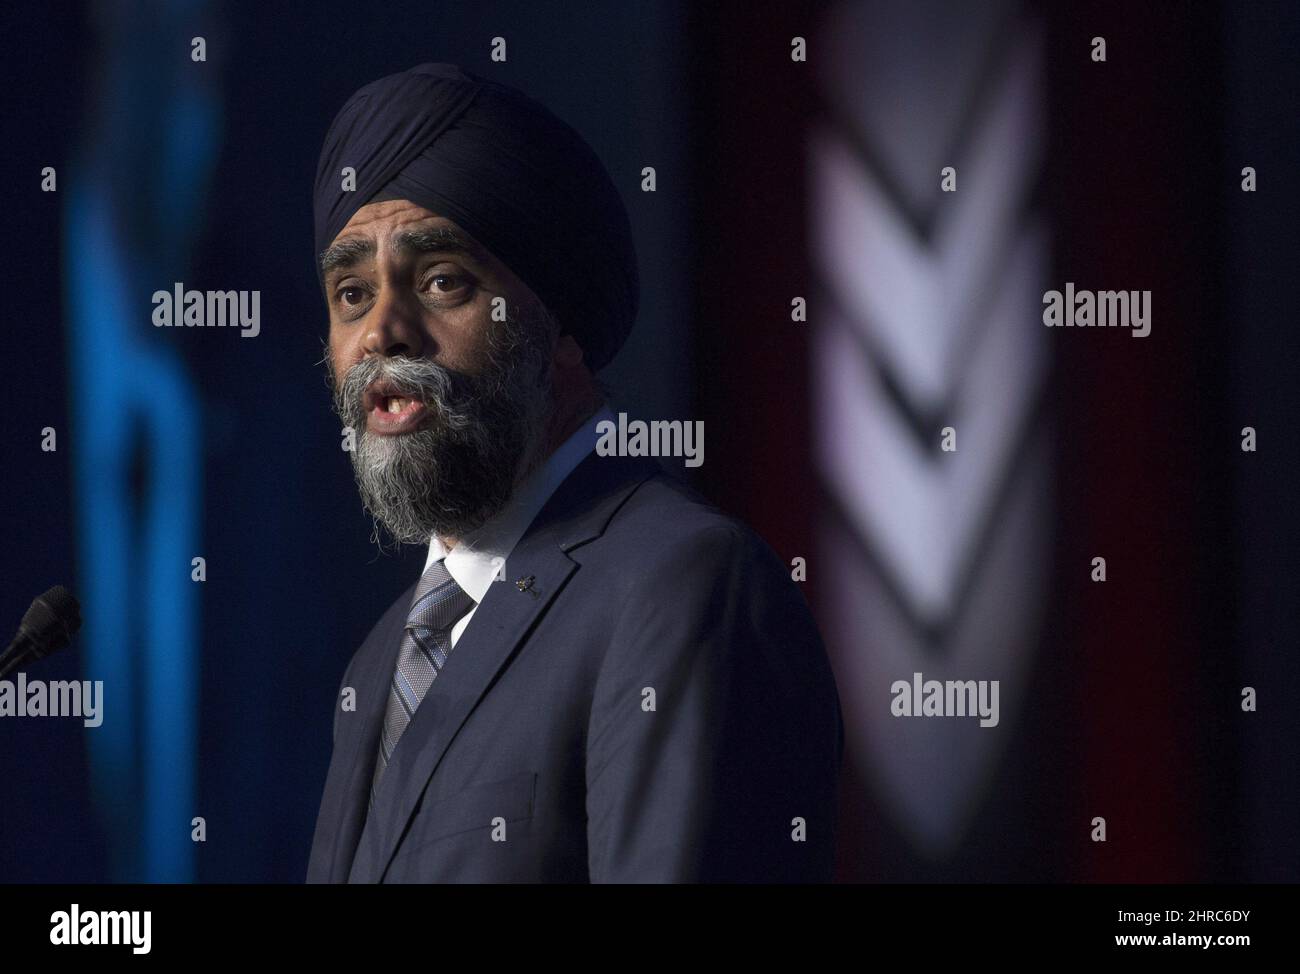 Minister of National Defence Minister Harjit Sajjan speaks at the Canadian Association of Defence and Security conference in Ottawa, Wednesday May 31, 2017. Sajjan used a major speech Wednesday to the defence industry to blast American firm Boeing for picking a trade spat with Bombardier. THE CANADIAN PRESS/Adrian Wyld Stock Photo